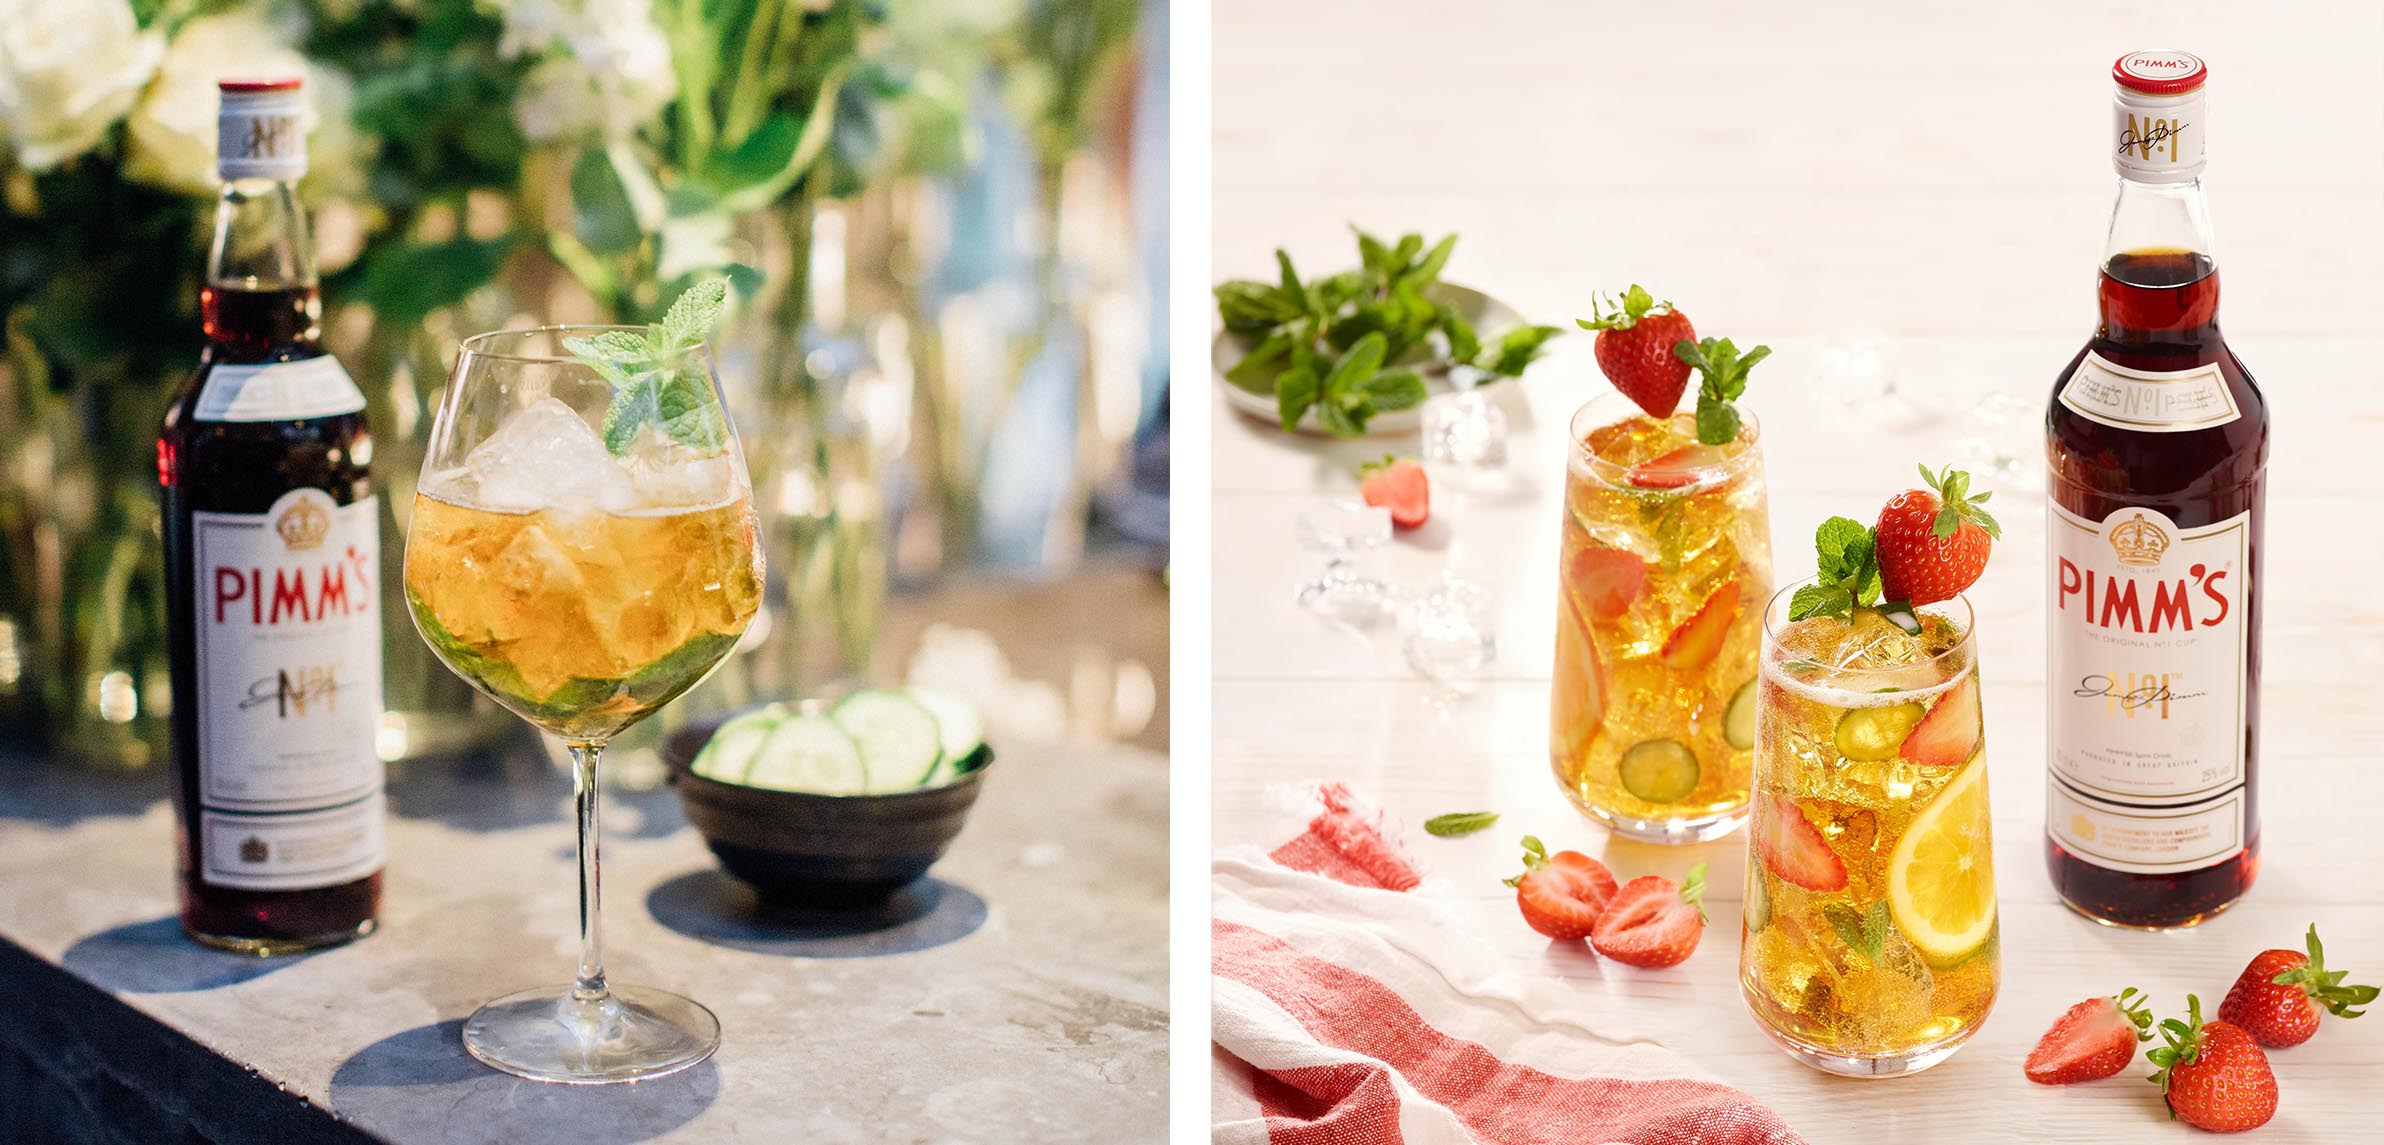 Pimm's No 1 Cup images with glorious drinks